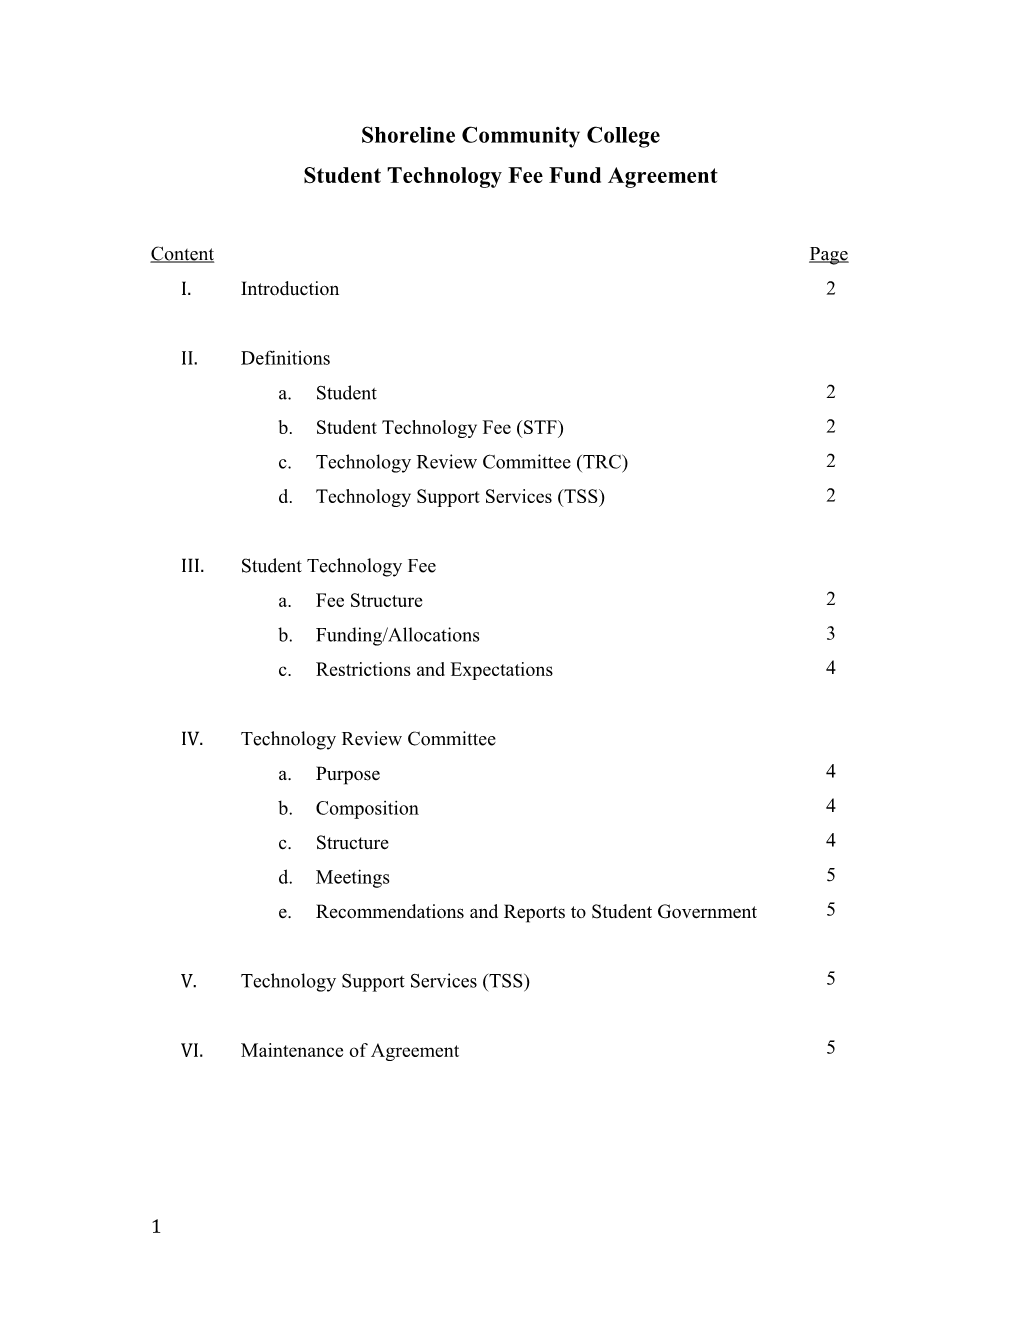 Student Technology Fee Fund Agreement